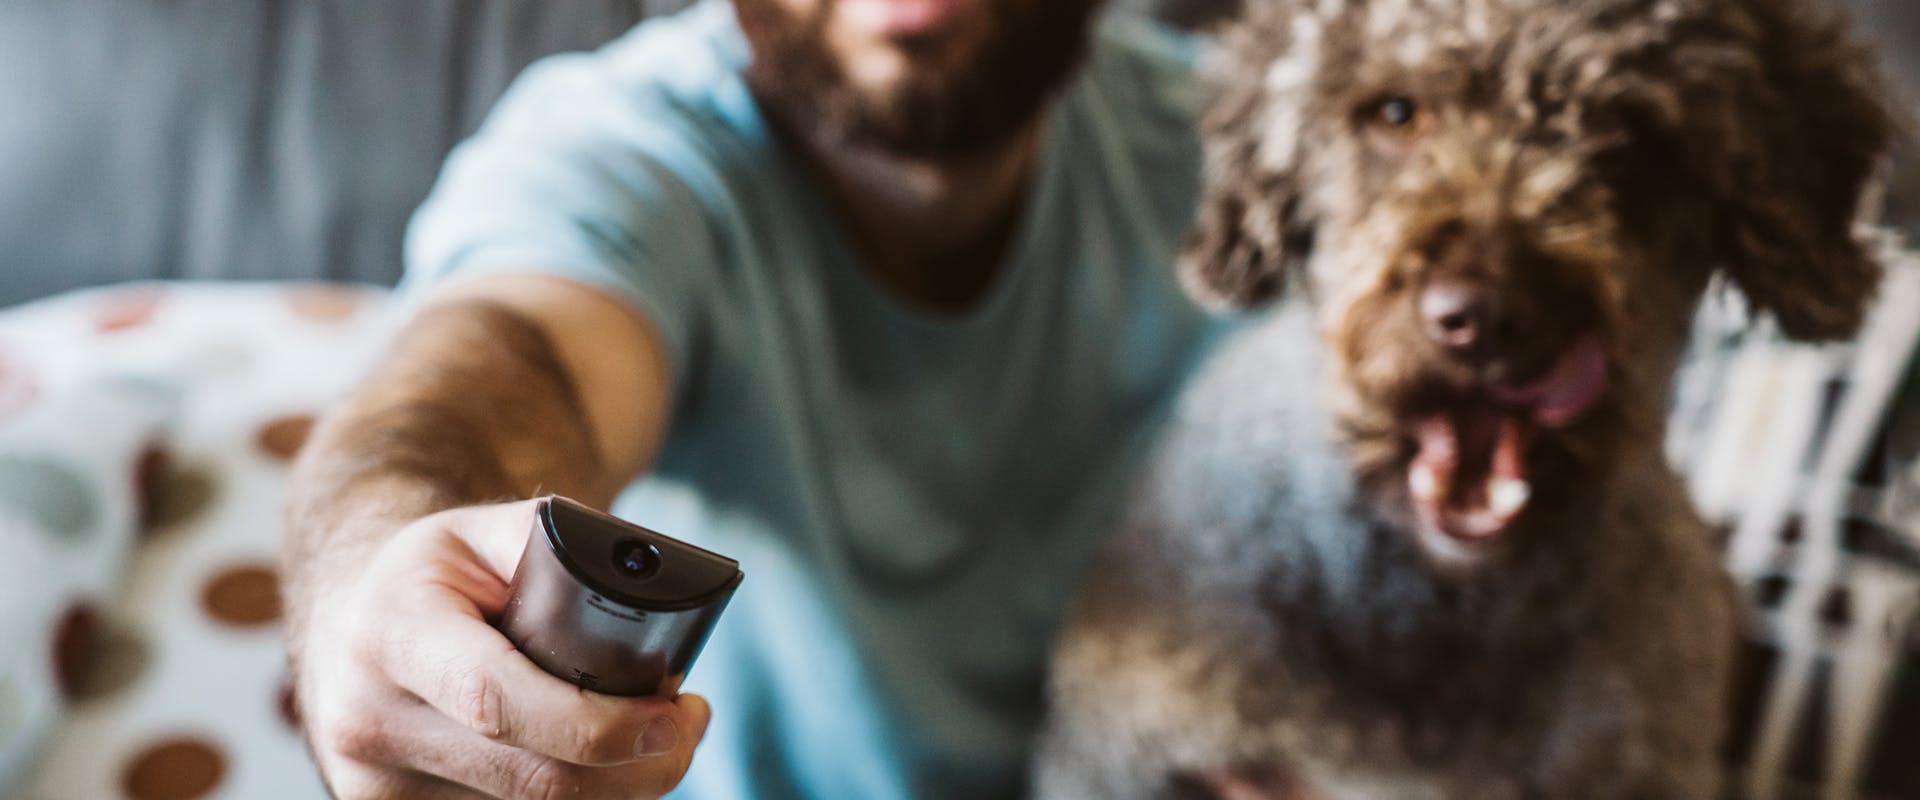 A man, sitting next to a dog, pointing a TV remote